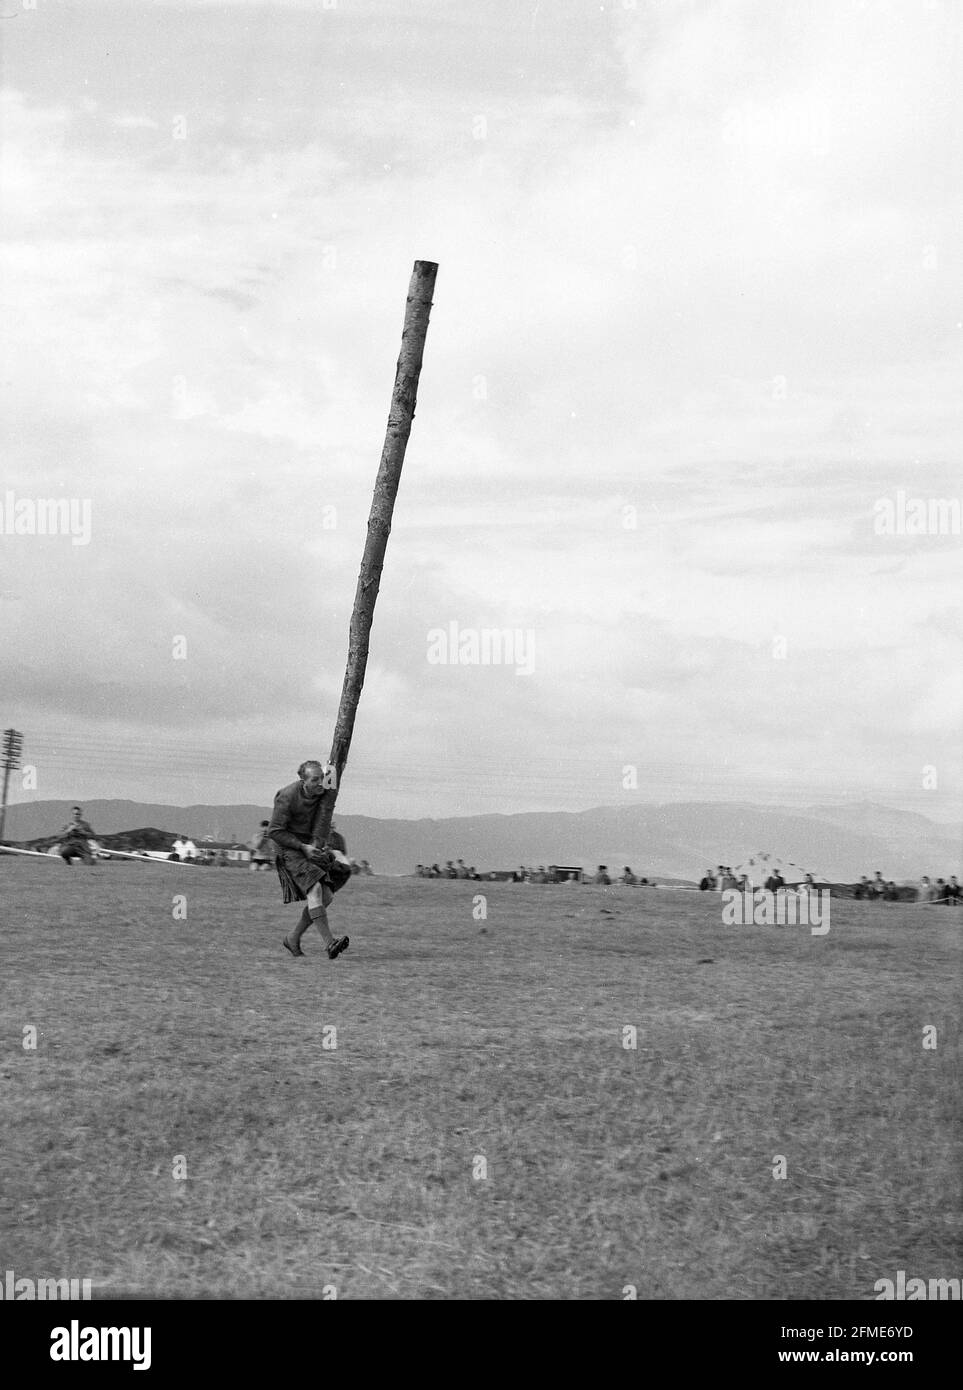 1956, a competitor at a highland games about to toss the caber, Scotland, UK. A traditional and well-loved athletic event at a Scottish highland games, the 'caber toss' involves a competitor tossing a long, heavy pole so that it turns end over end. Usually made from a Larch tree, and up to 20 feet in length, the caber is stood upright and then lifted up and tossed, not thrown. Caber is the Gaelic word for pole. Devised by Scottish woodsmen, the caber toss was first recorded in 1574, at a military meet  as toss 'ye barr', when clan warriors tested their physical strength in sporting contests. Stock Photo